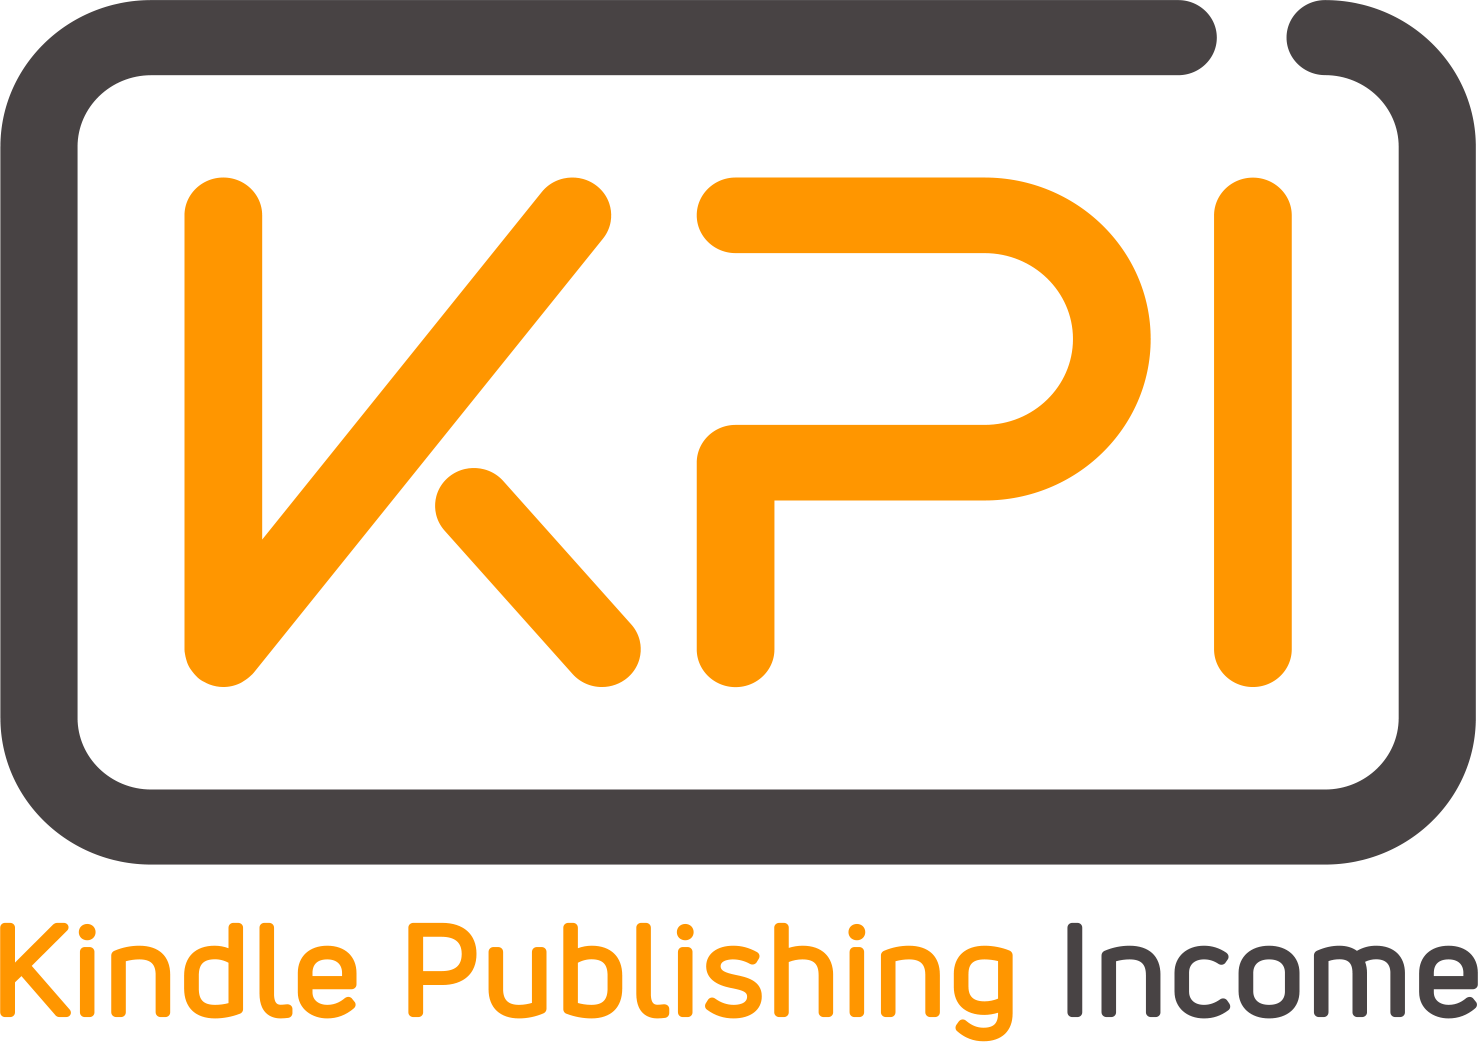 Kindle Publishing Income by Sophie Howard